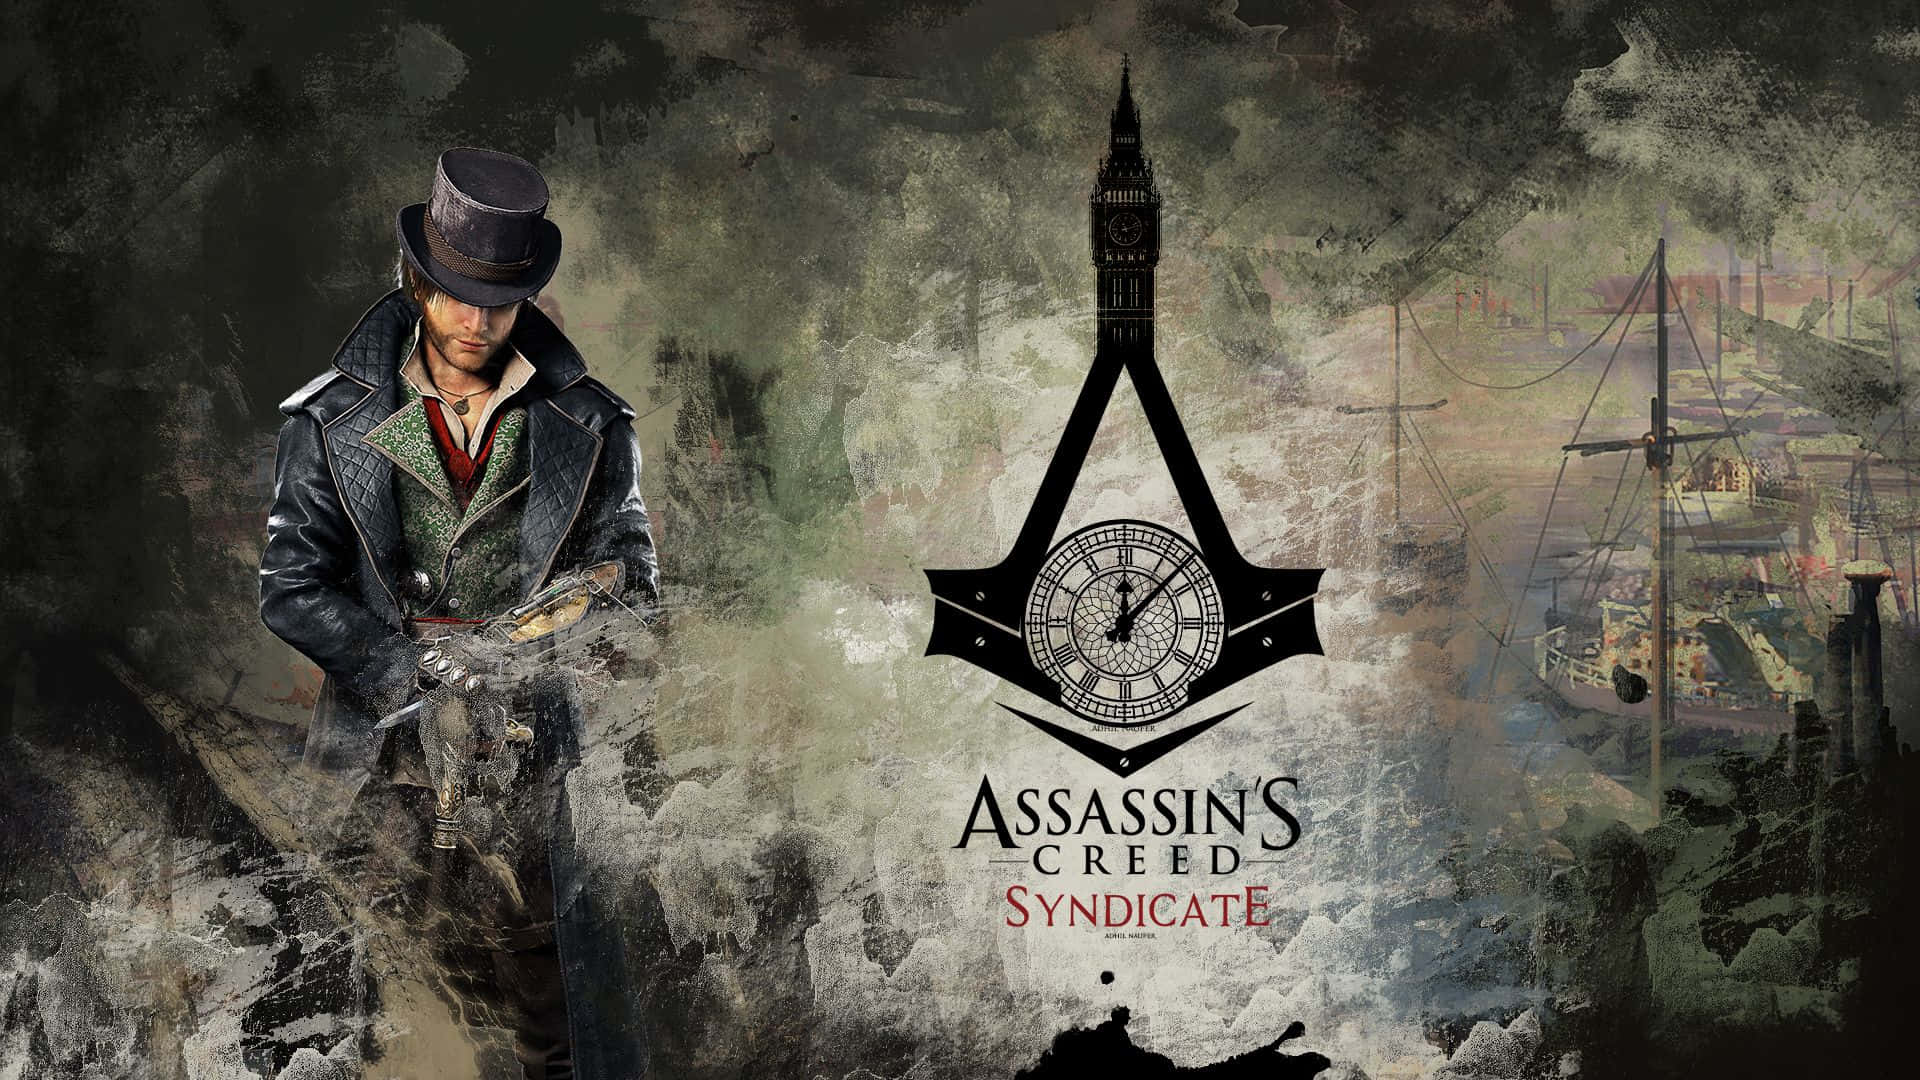 Assassin's Creed Syndicate Characters in Action Wallpaper